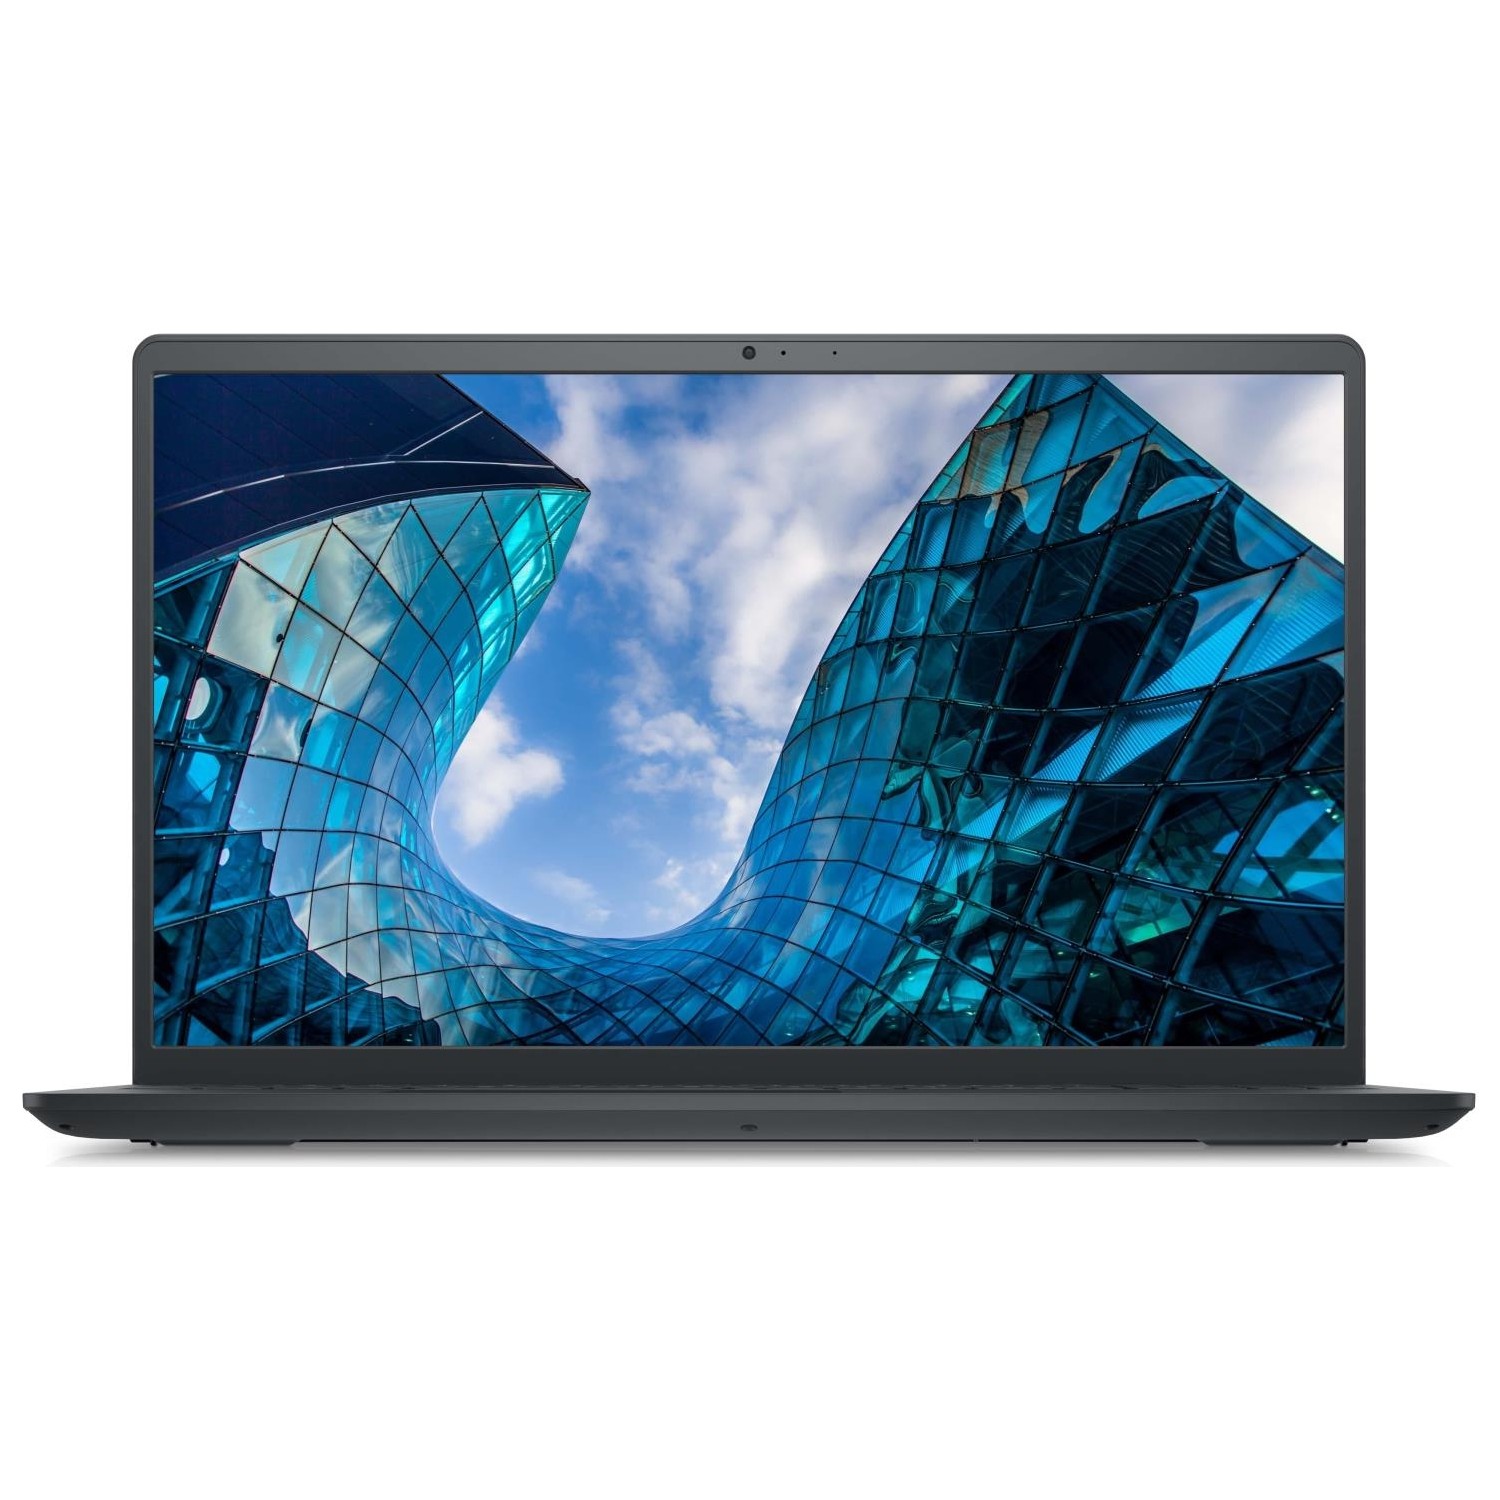 Dell Inspiron 15 3525 Notebook